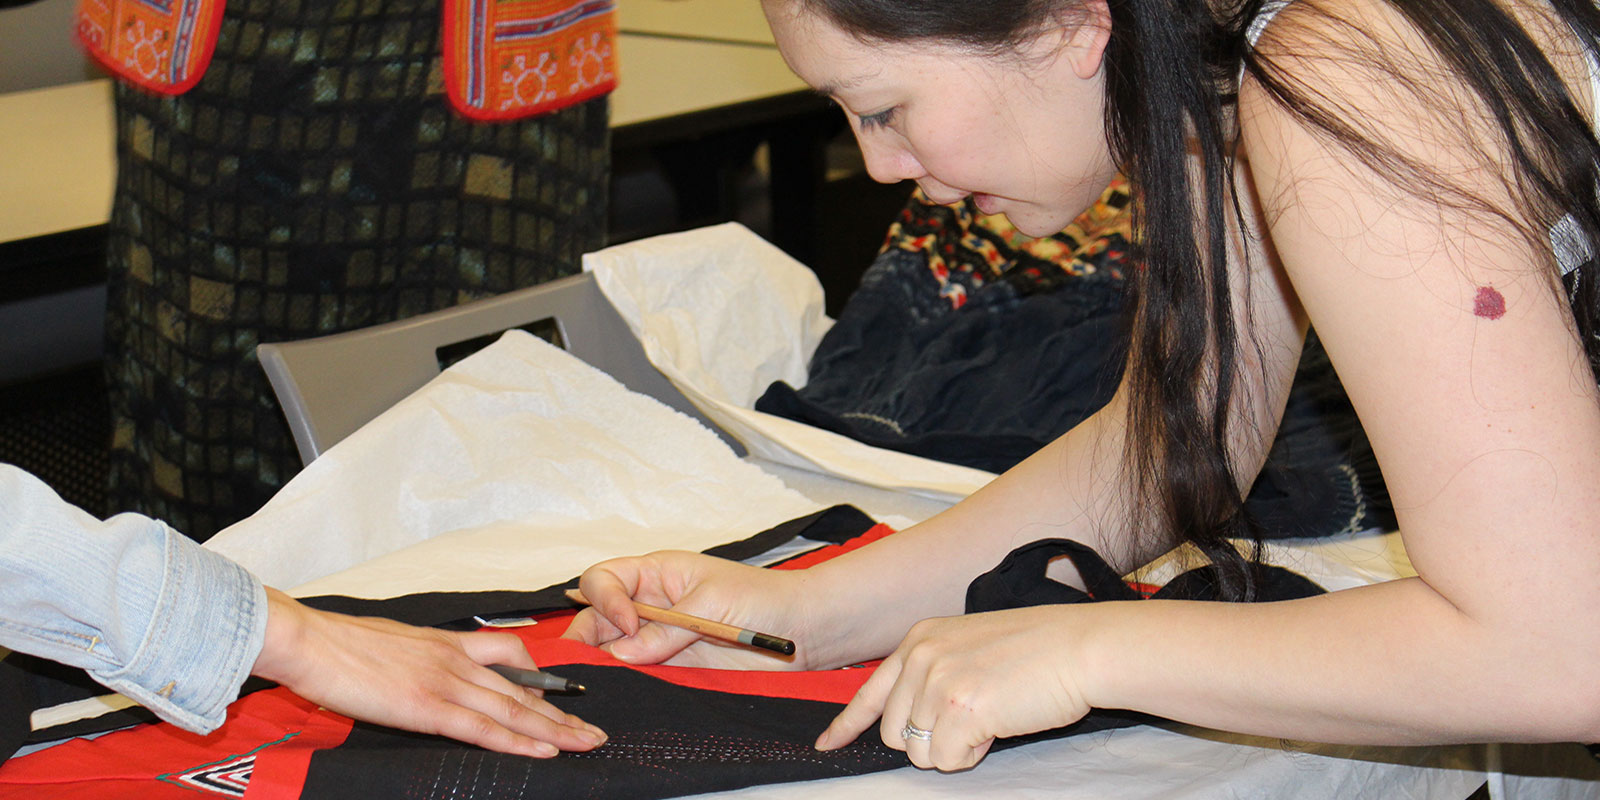 a woman holds a pencil while touching a hmong textile and examining its details